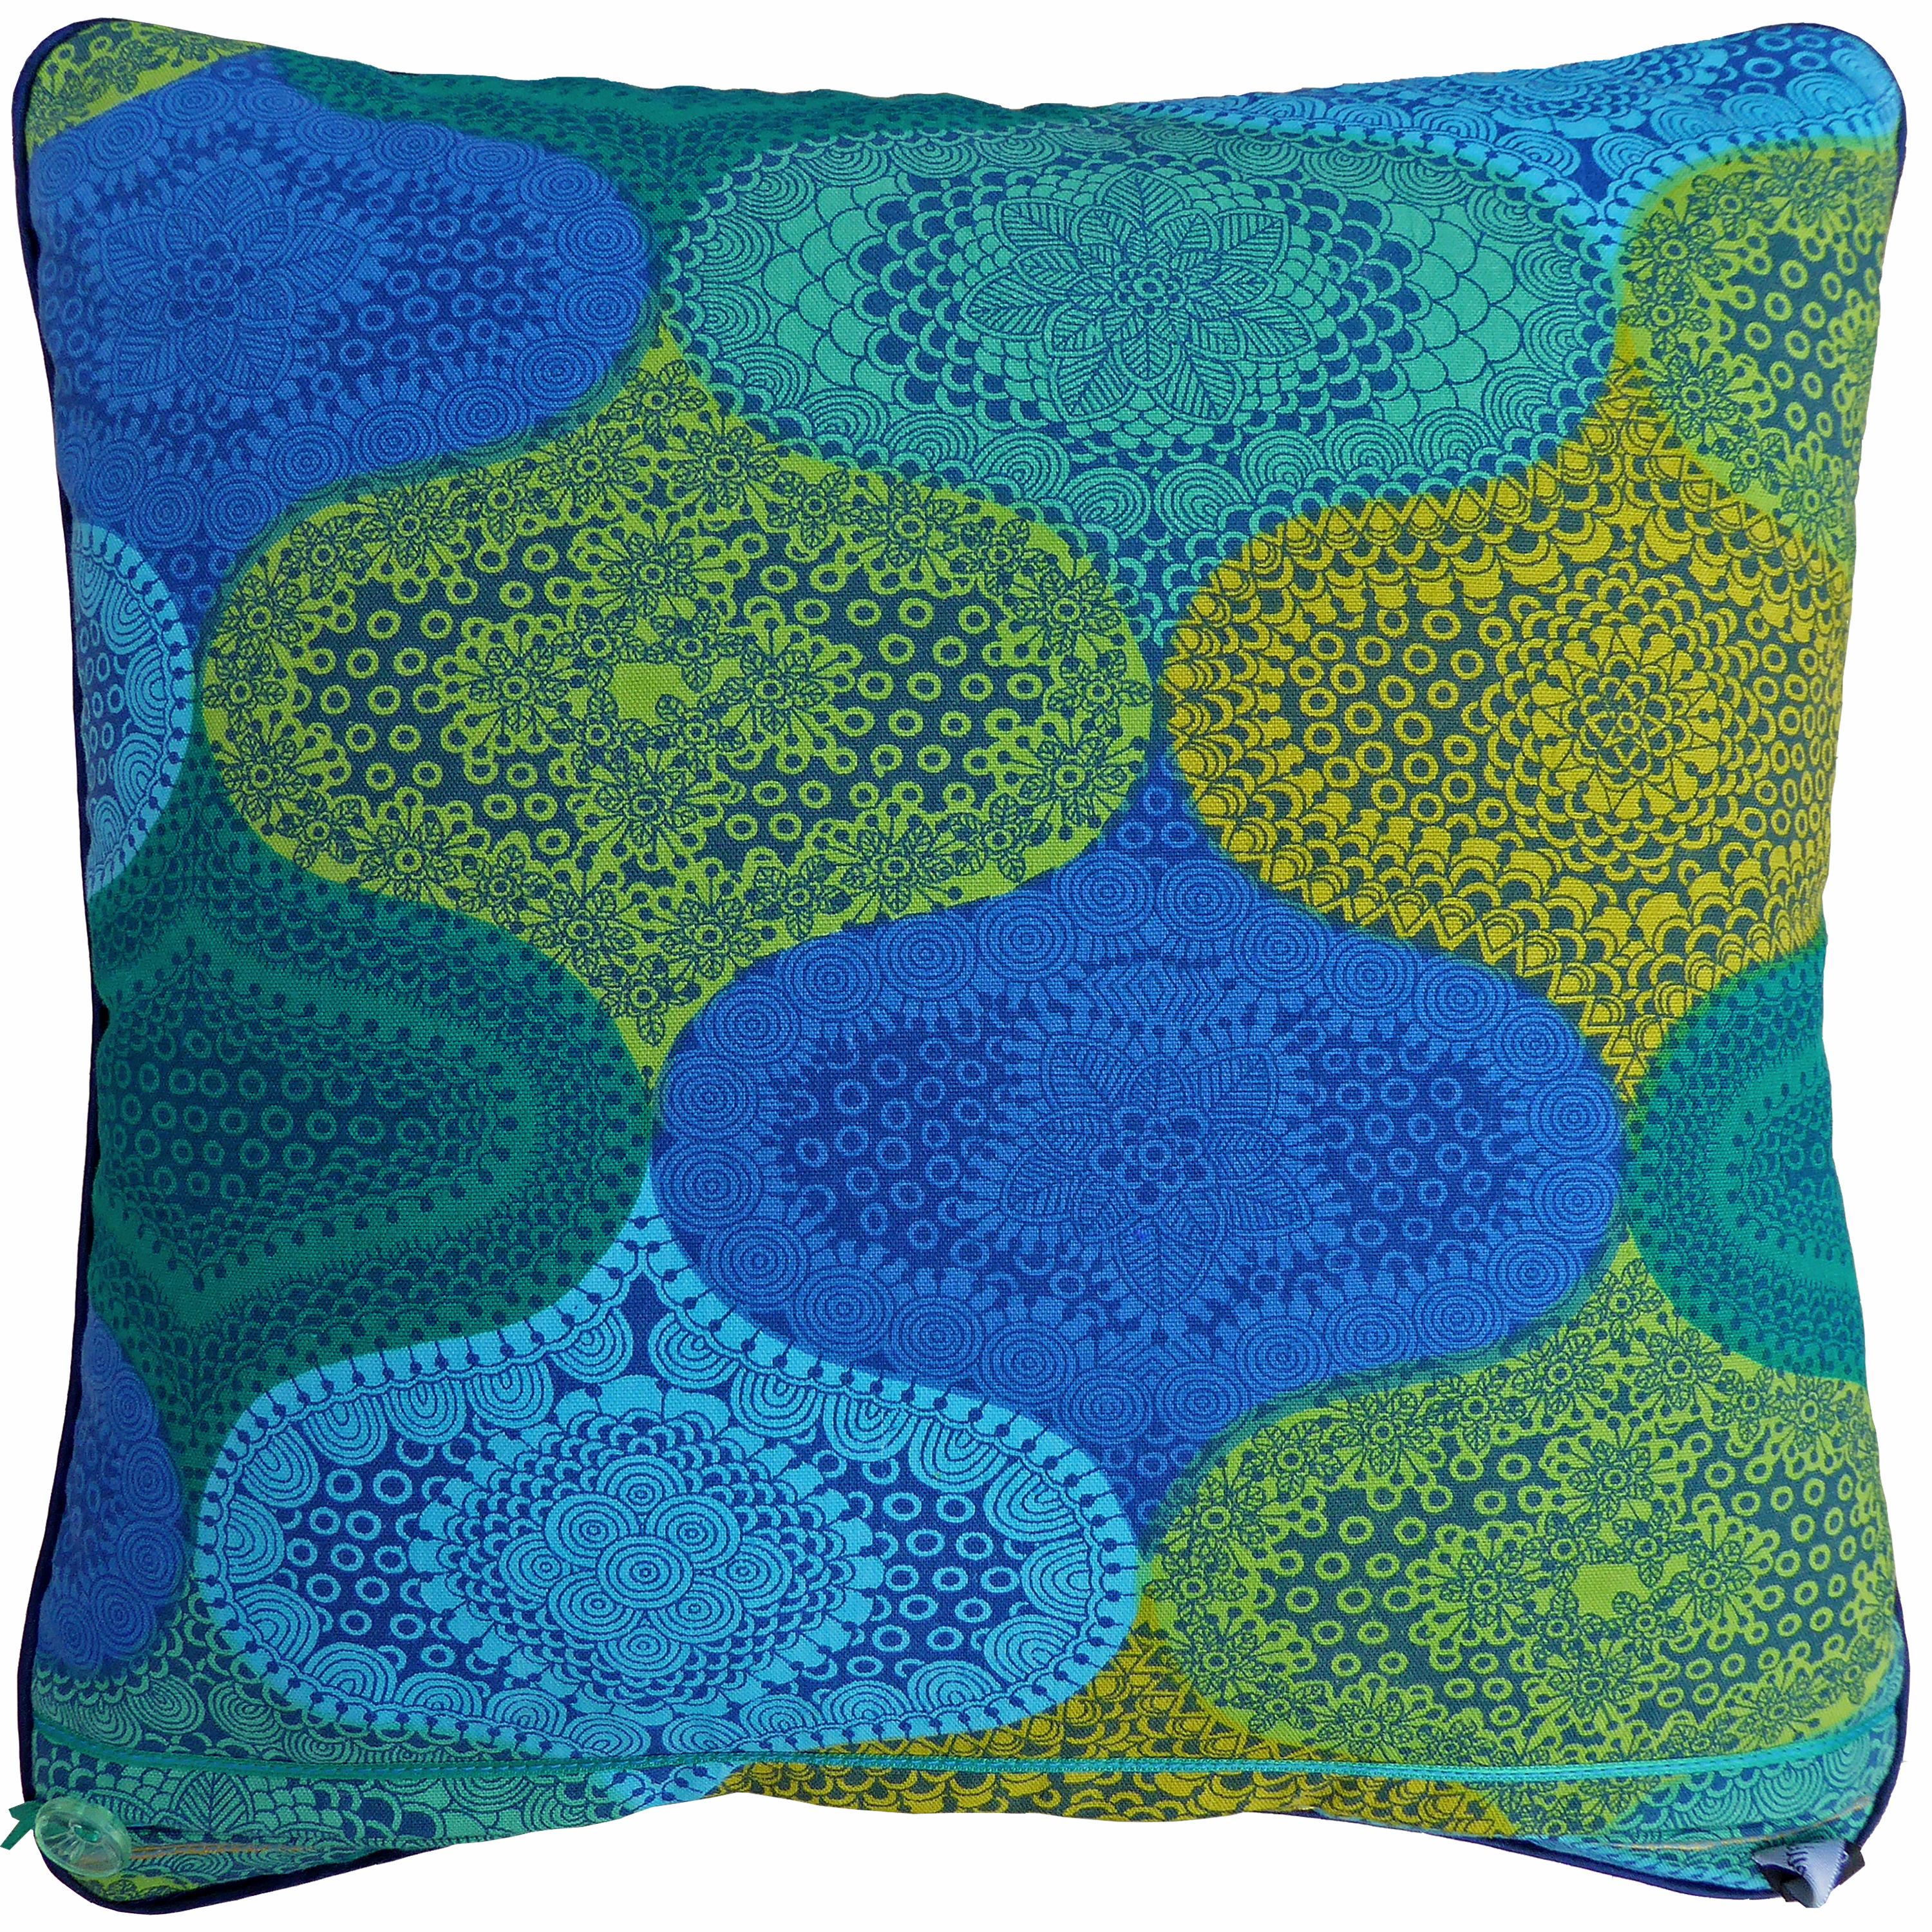 Alhambra,
circa 1970
British bespoke made pillow created by using original screen printed furnishing fabric designed by Heather Brown for Heals Fabrics Ltd. The colours remain as vibrant now as in the seventies. A sample of the Alhambra fabric can